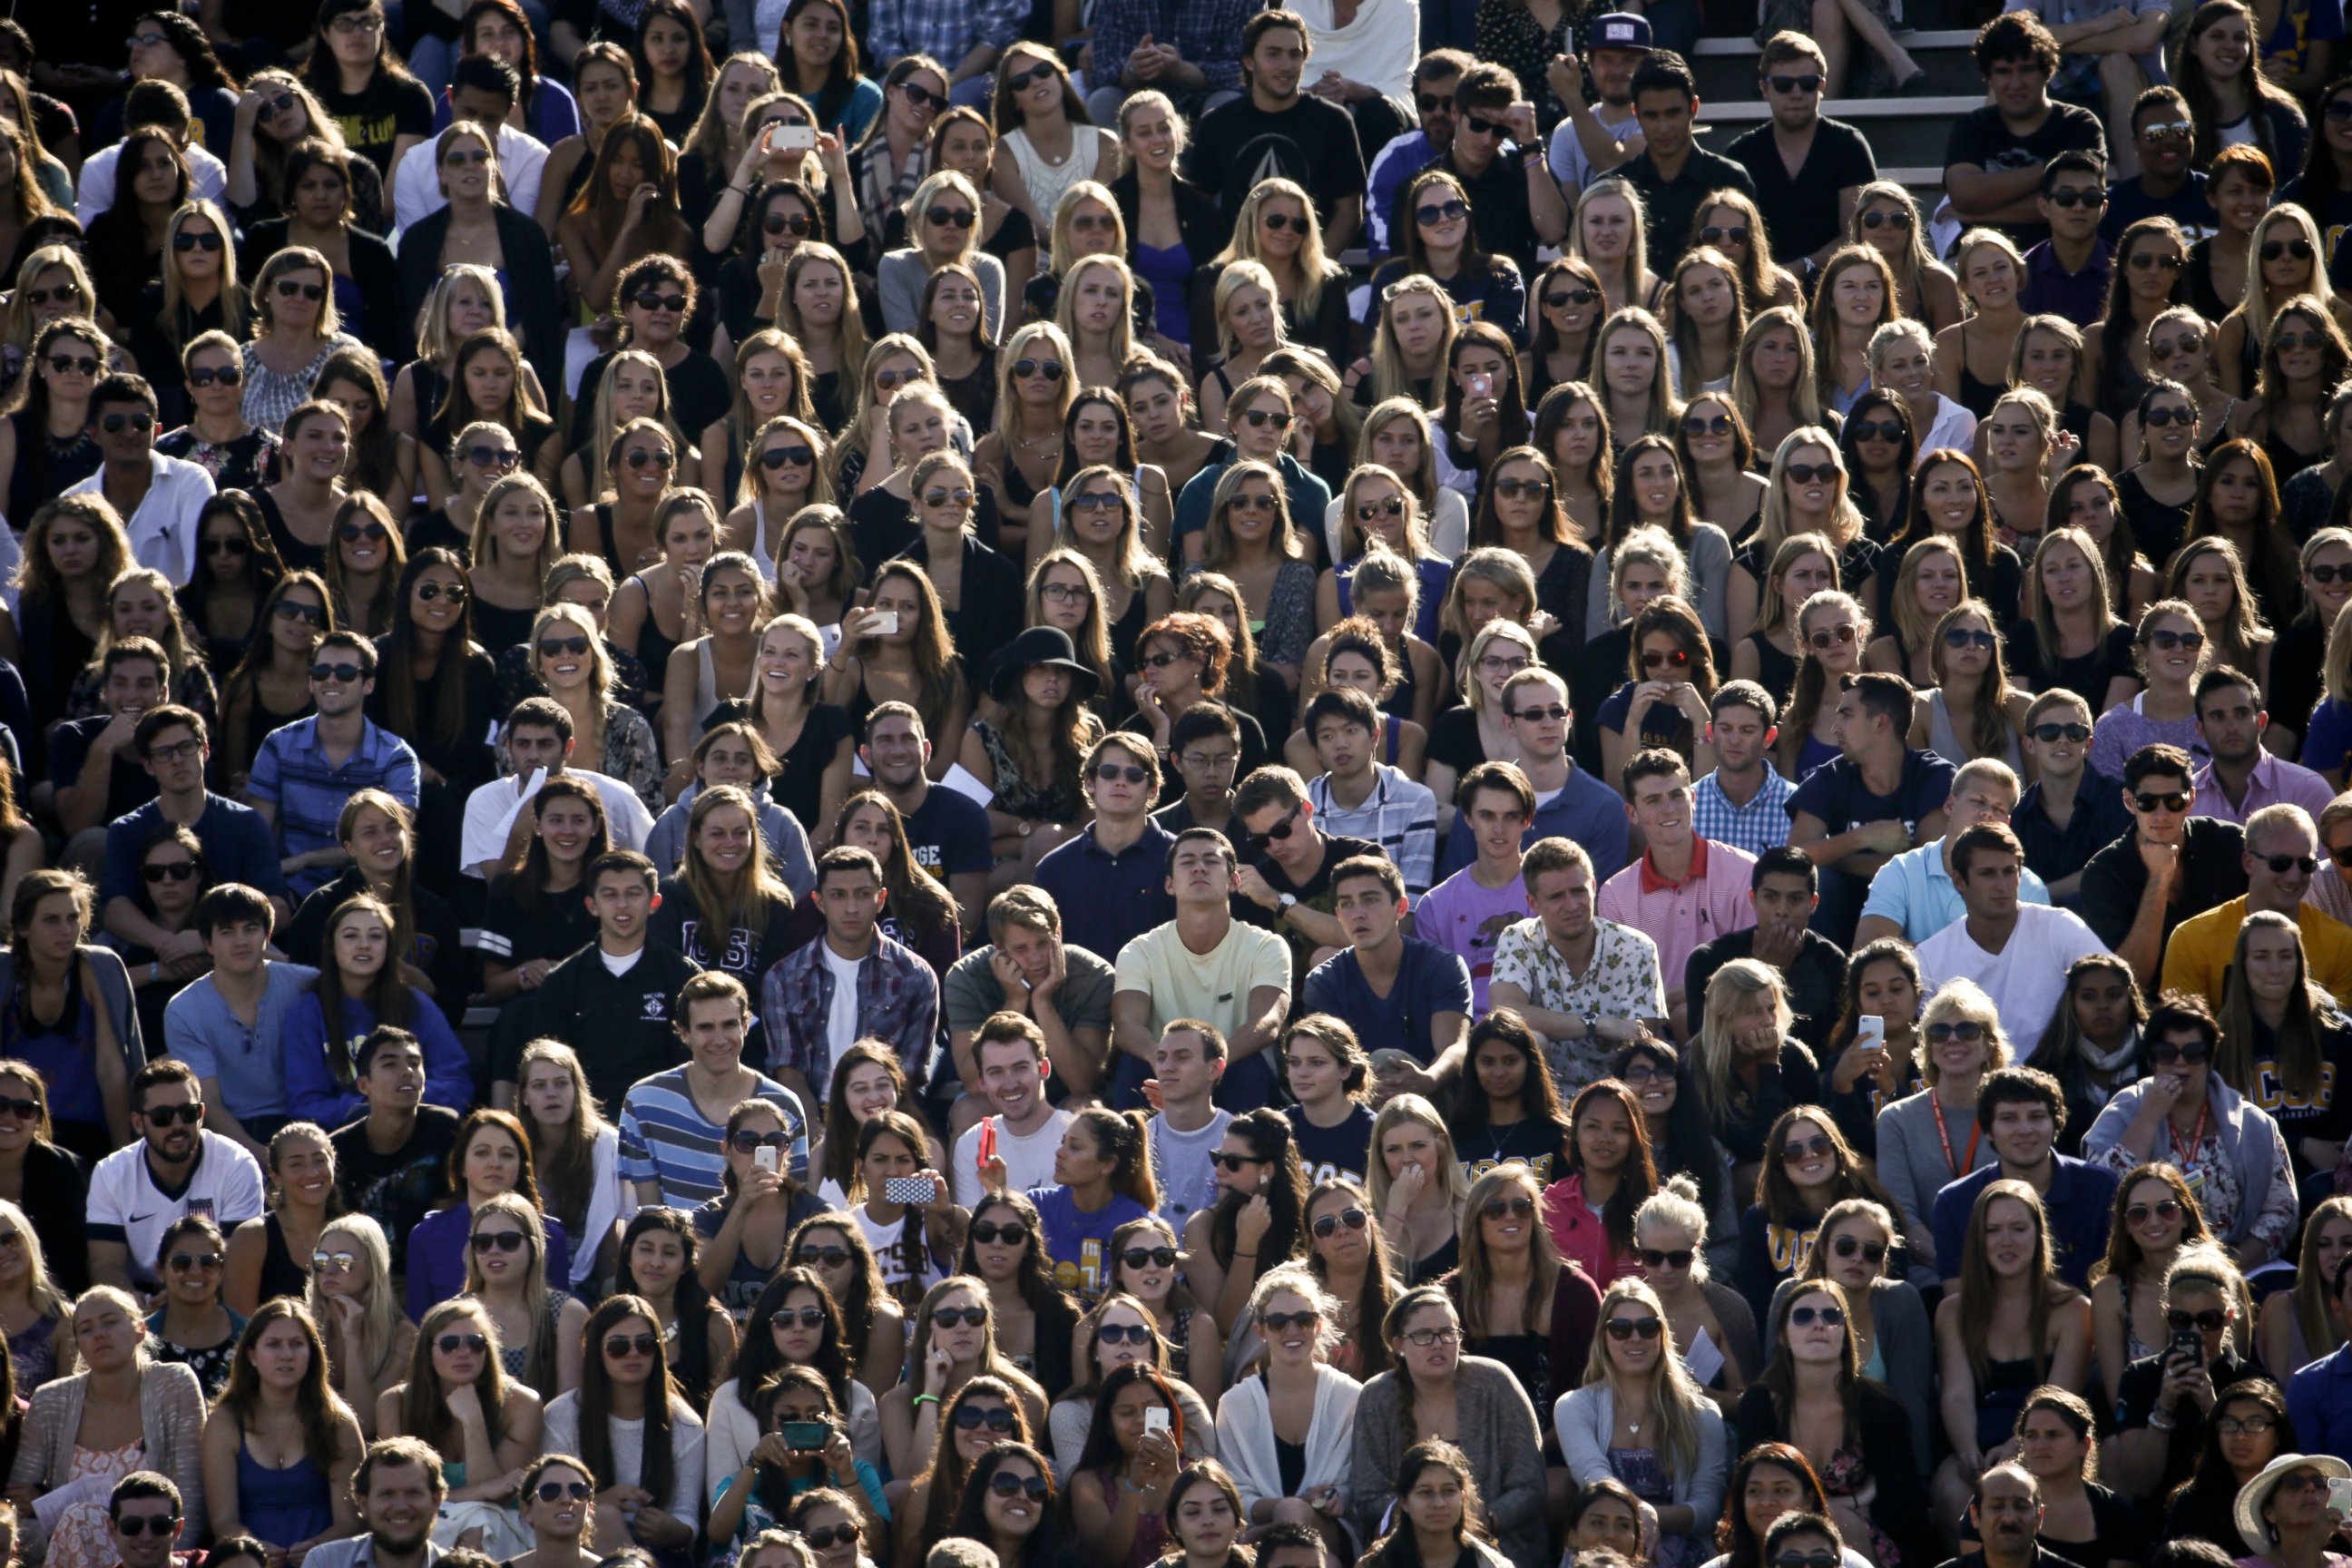 PHOTO: People listen to a memorial service at Harder Stadium on the campus of University of California, Santa Barbara, May 27, 2014.